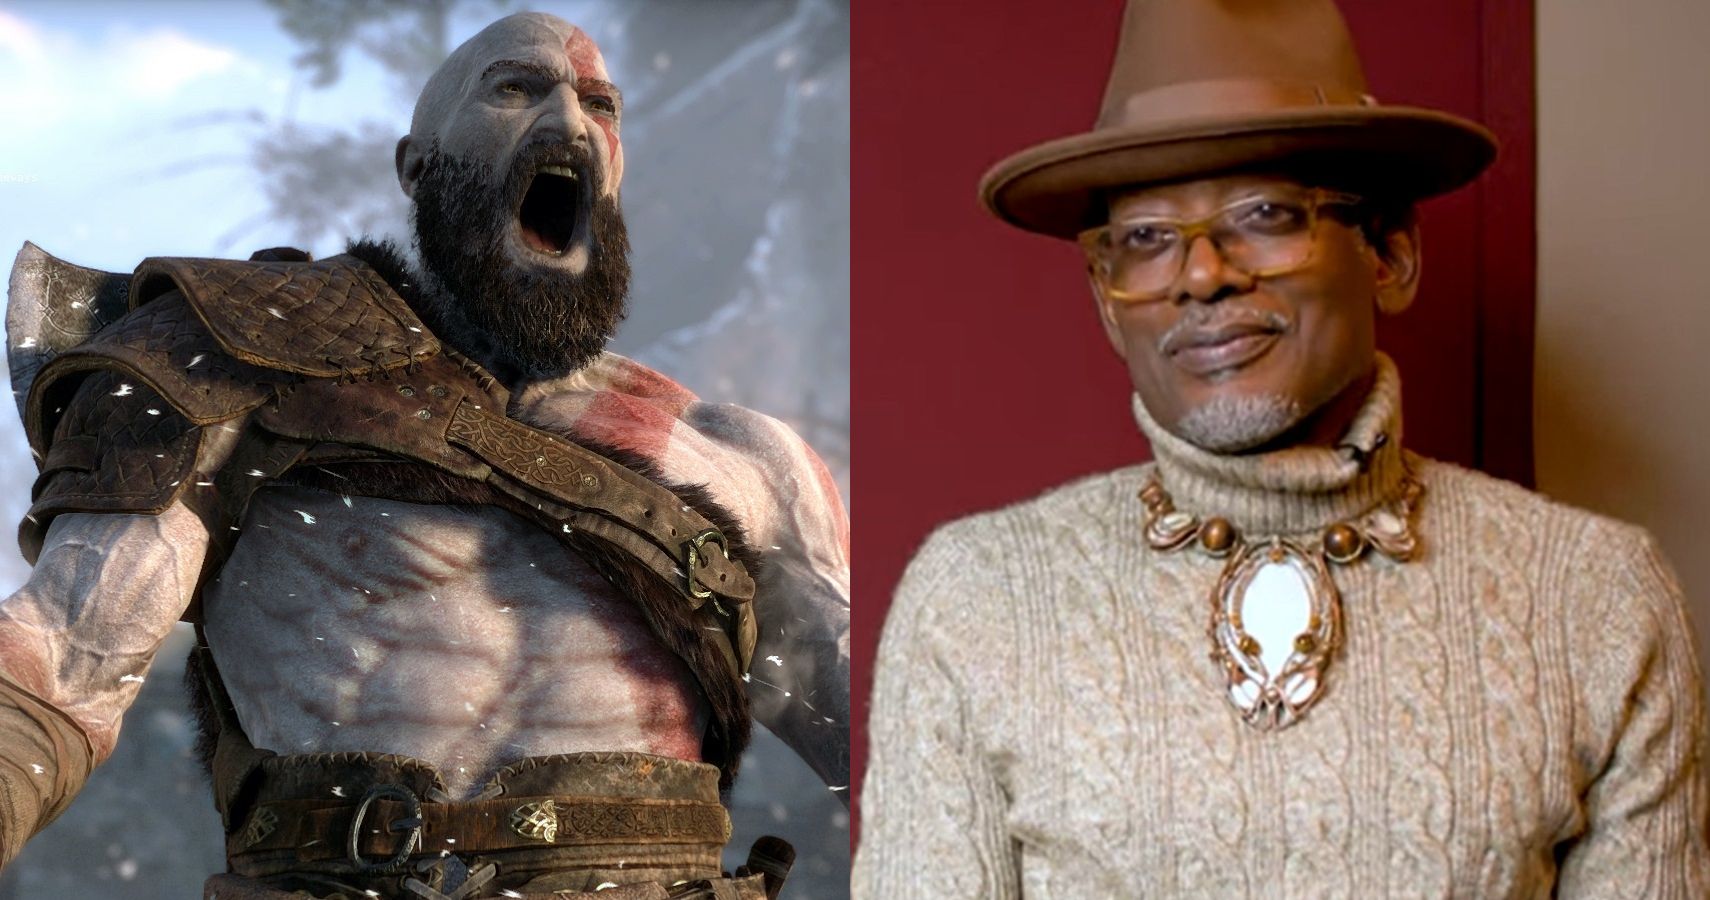 Who is the Kratos Voice Actor in God of War?